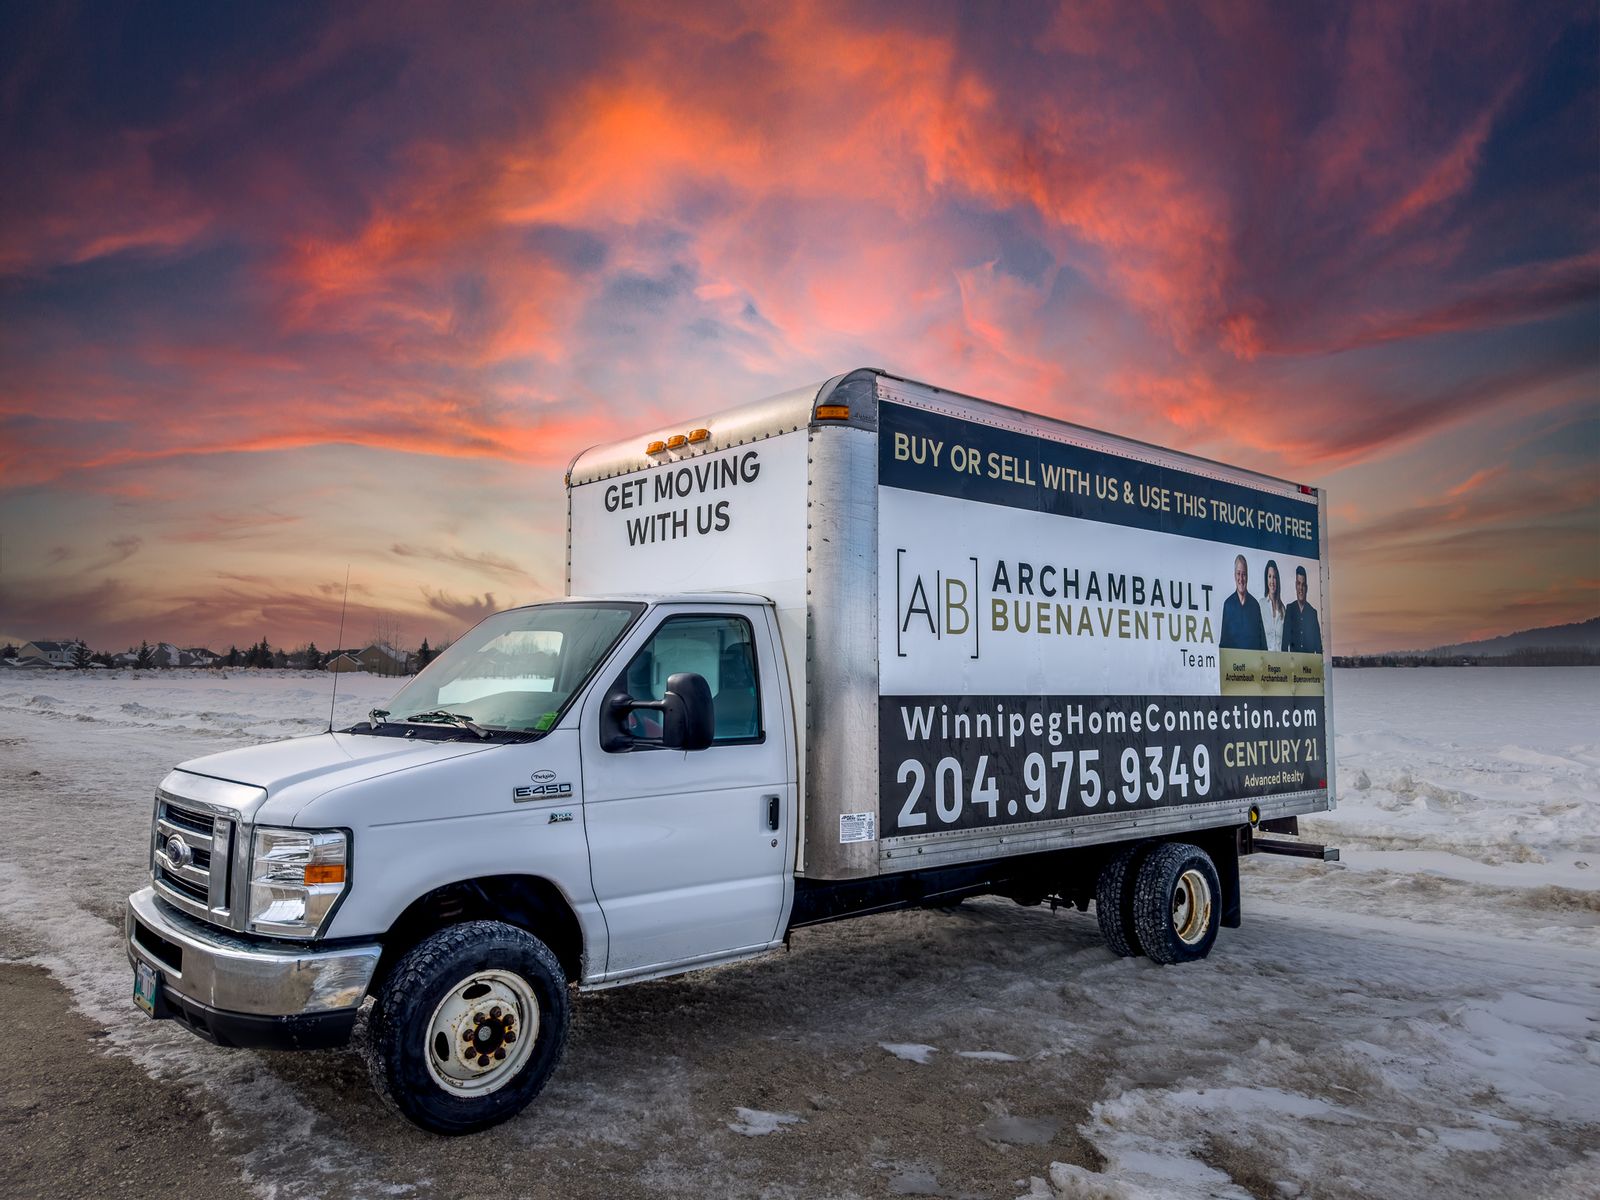 Outstanding Benefits of Working With the Archambault Buenaventura Real Estate Team—Including Free Moving Van Services and Donations to Local Charities